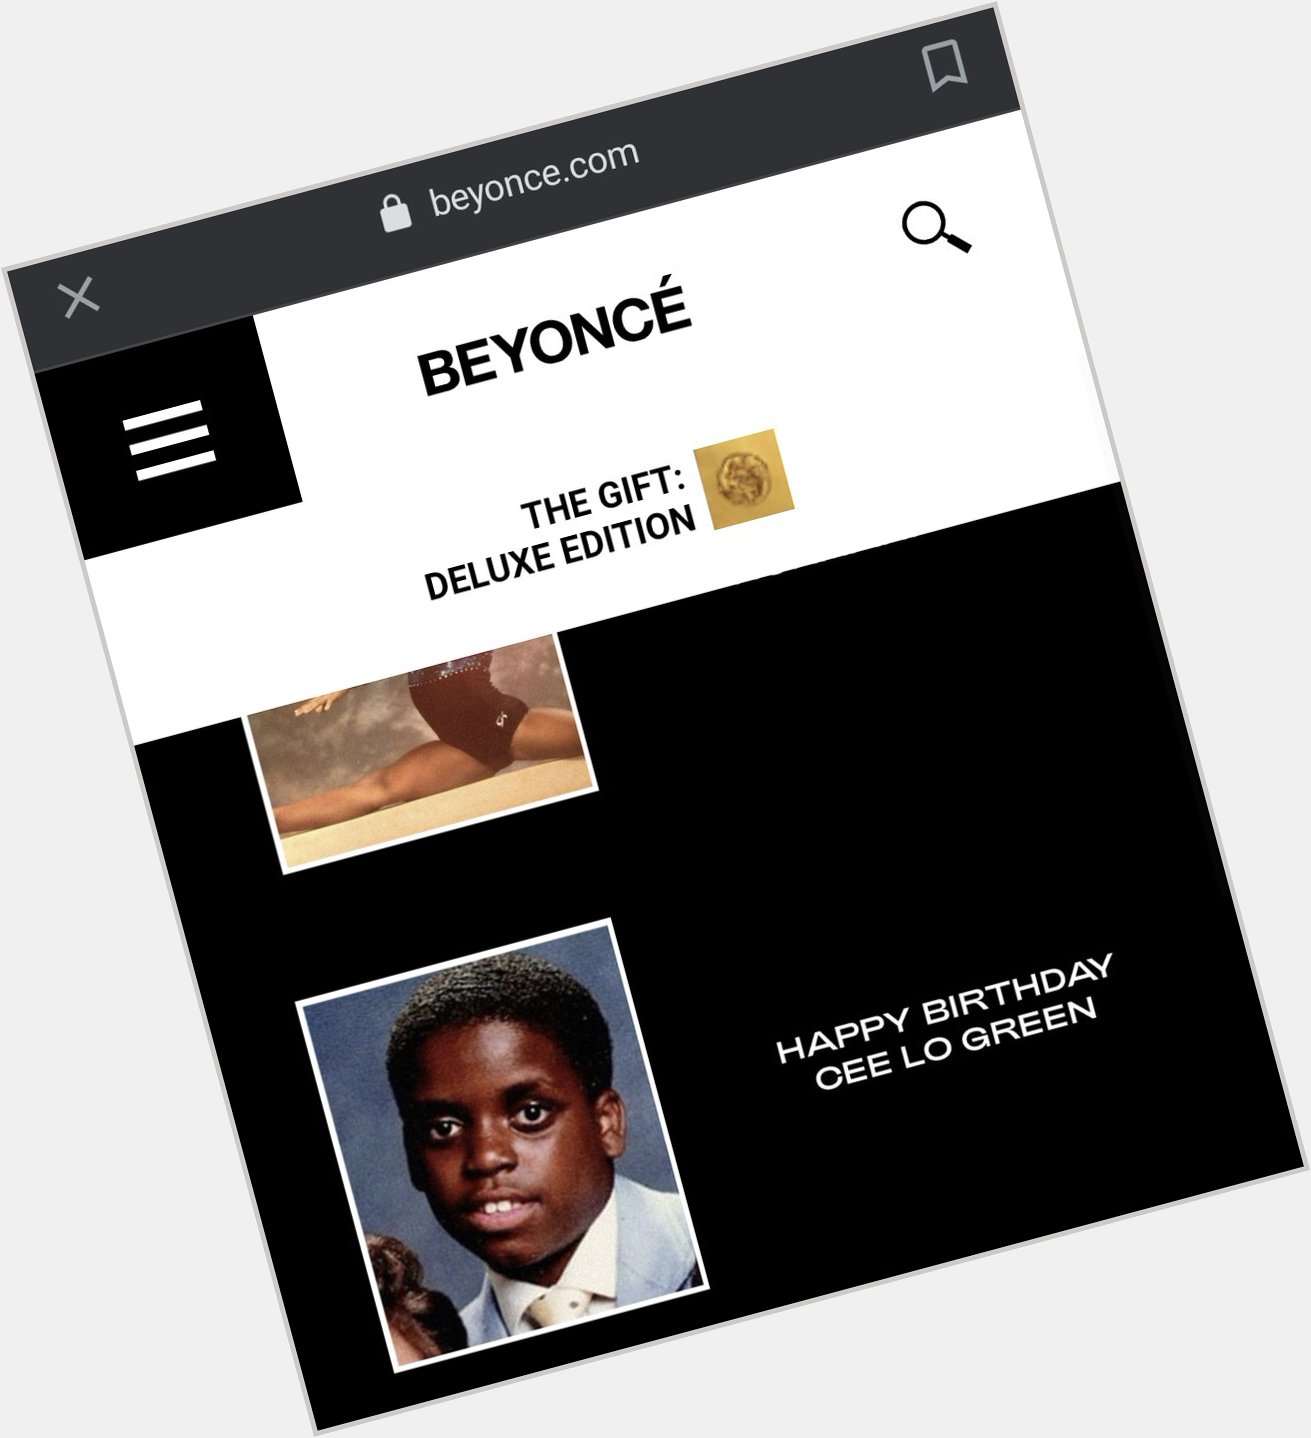 CeeLo Green - a man charged with giving drugs to women - has been wished a happy birthday on Beyonce\s website 